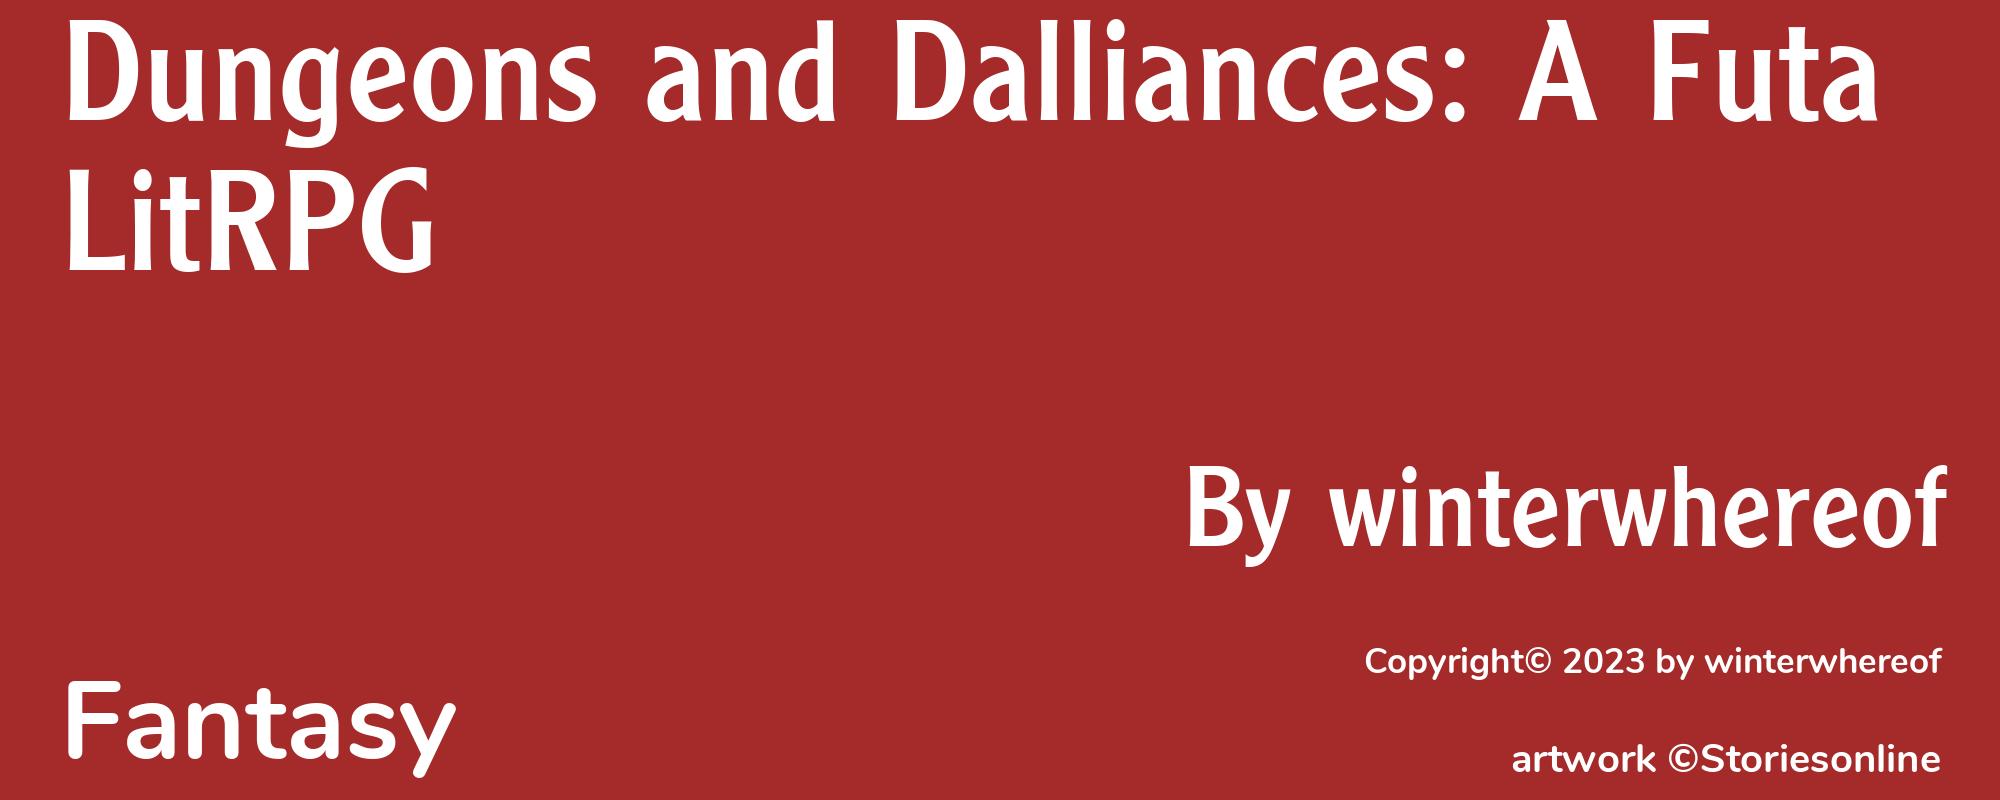 Dungeons and Dalliances: A Futa LitRPG - Cover